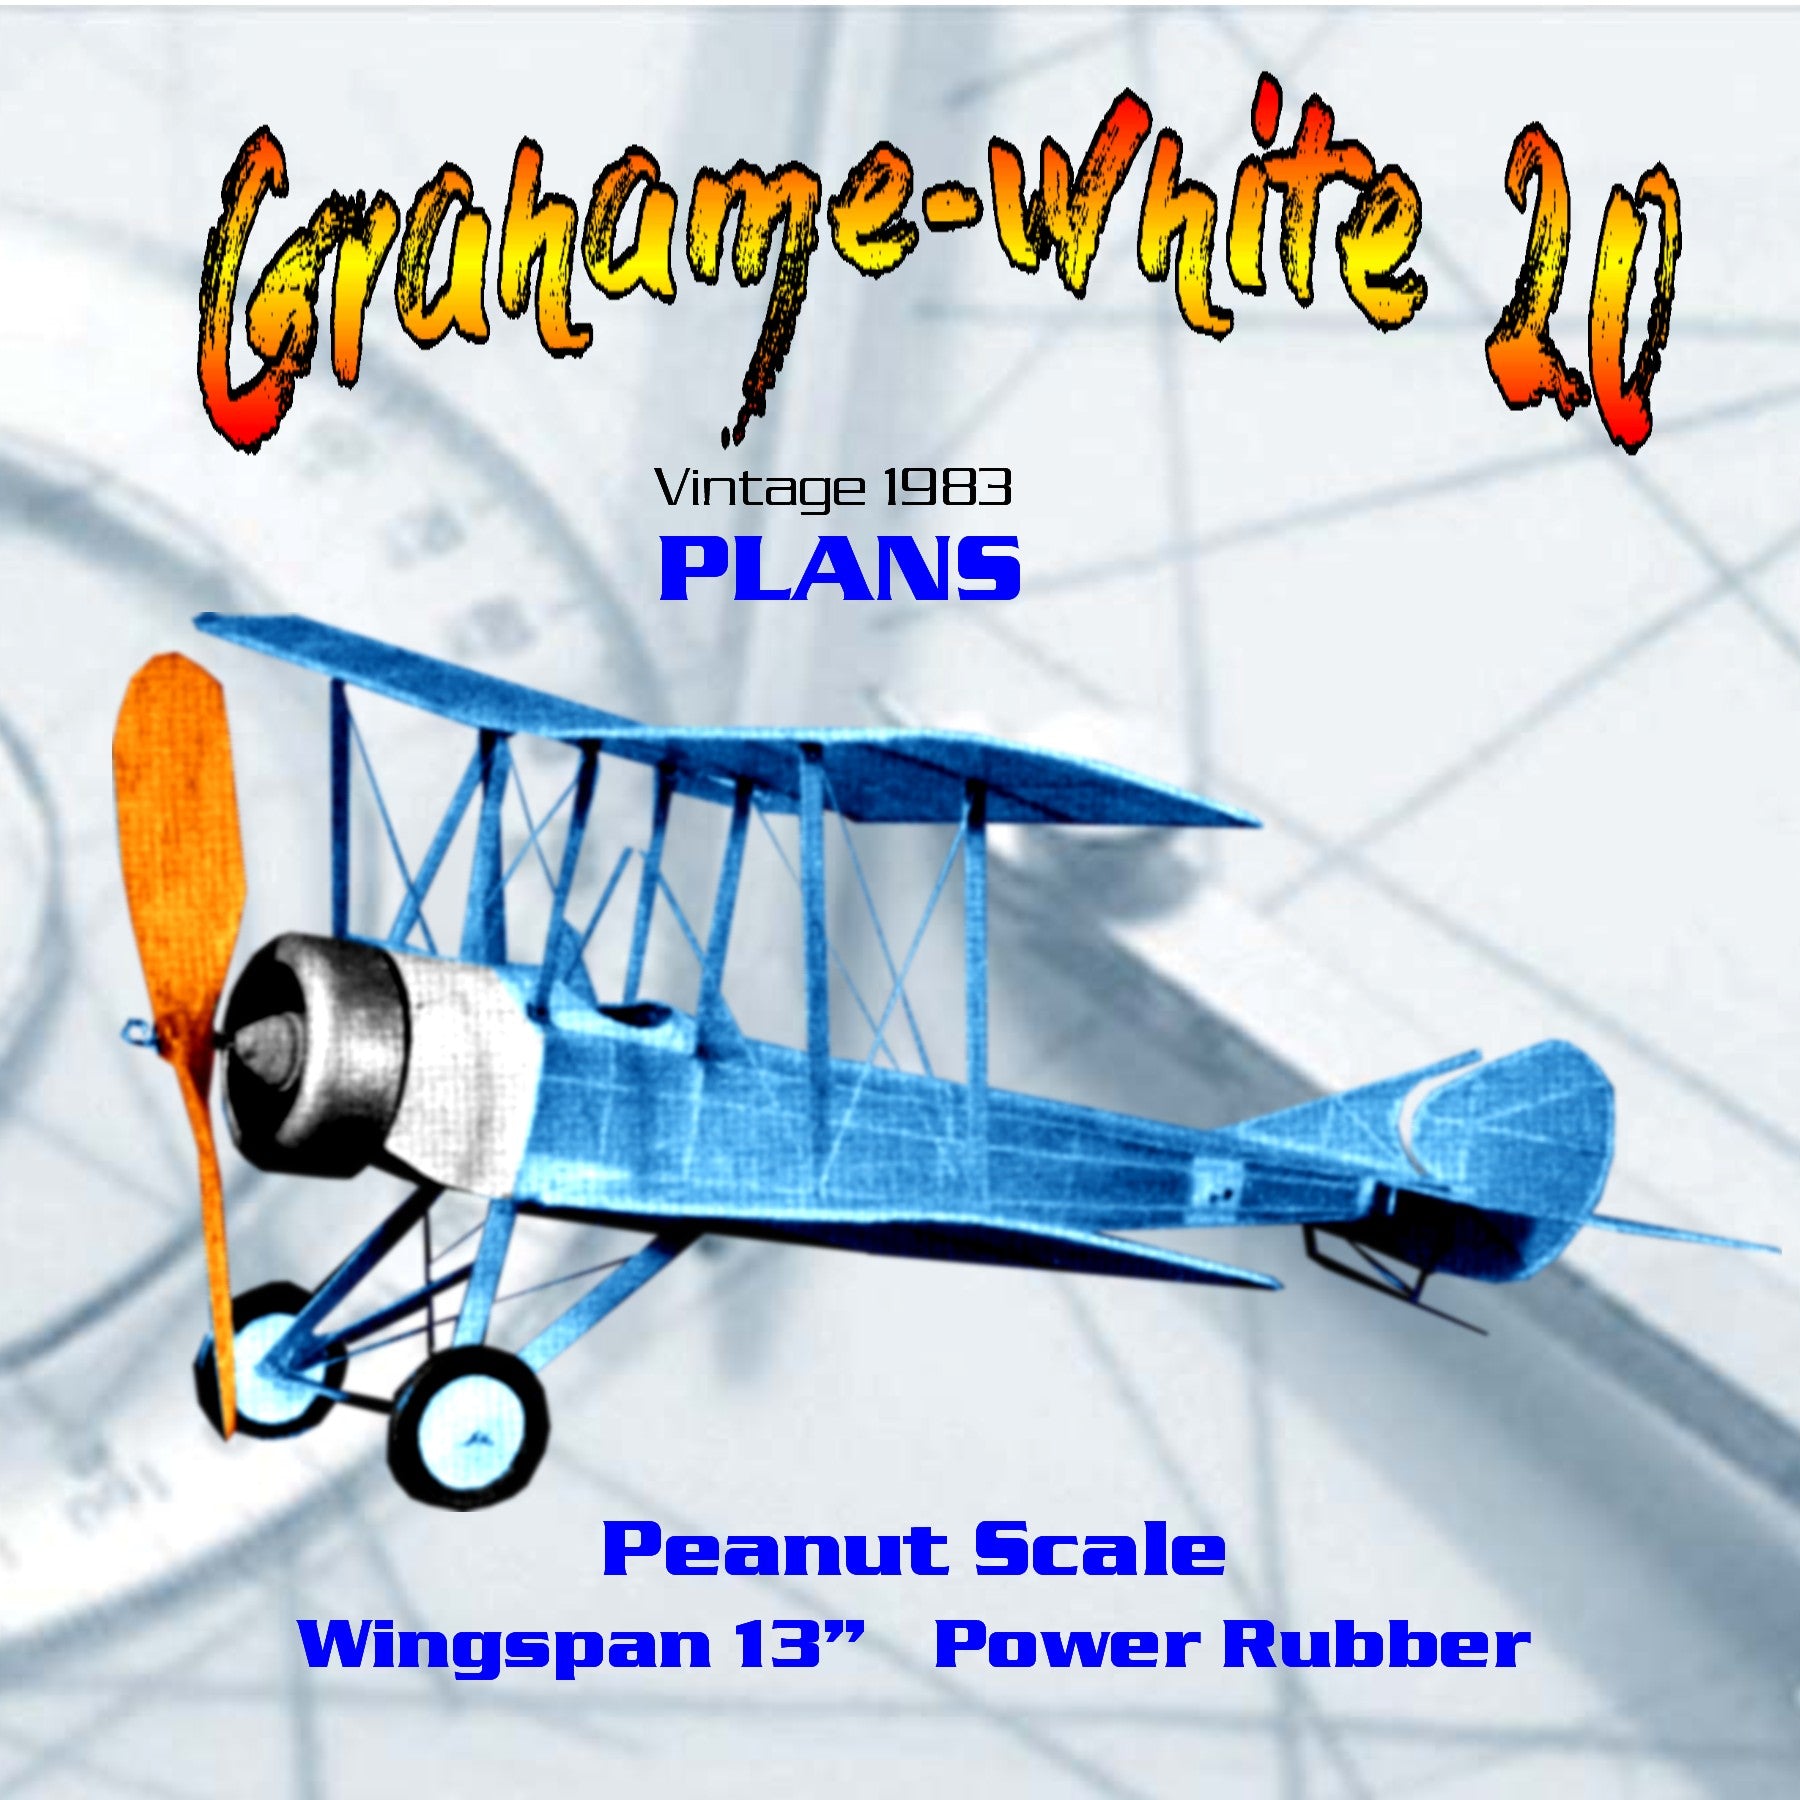 full size printed plans peanut scale "grahame-white 20"  easily adjusted and very stable in flight